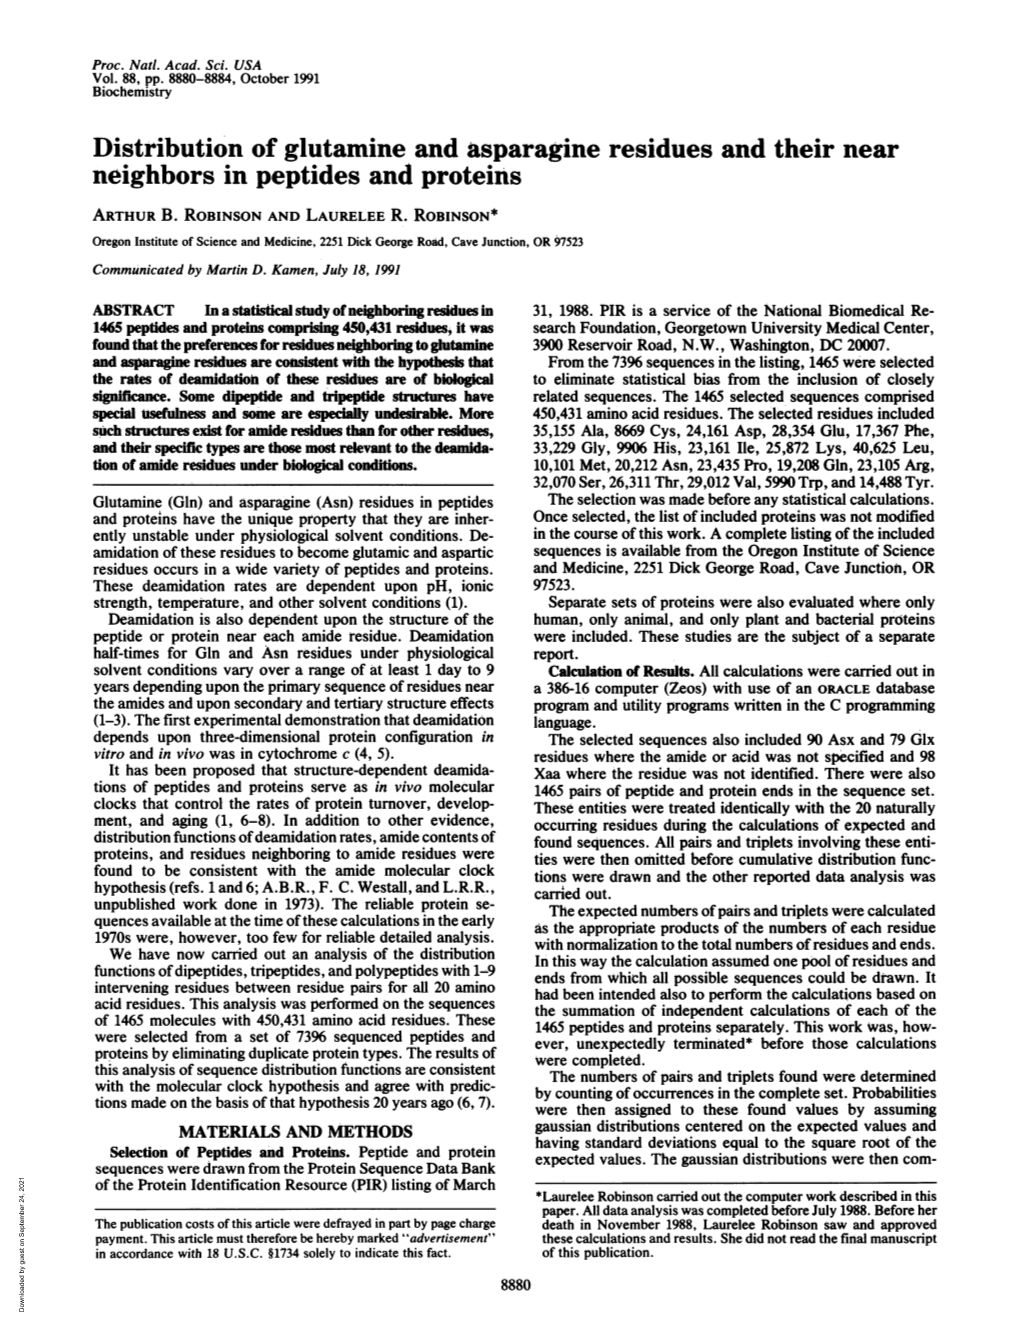 Distribution of Glutamine and Asparagine Residues and Their Near Neighbors in Peptides and Proteins ARTHUR B